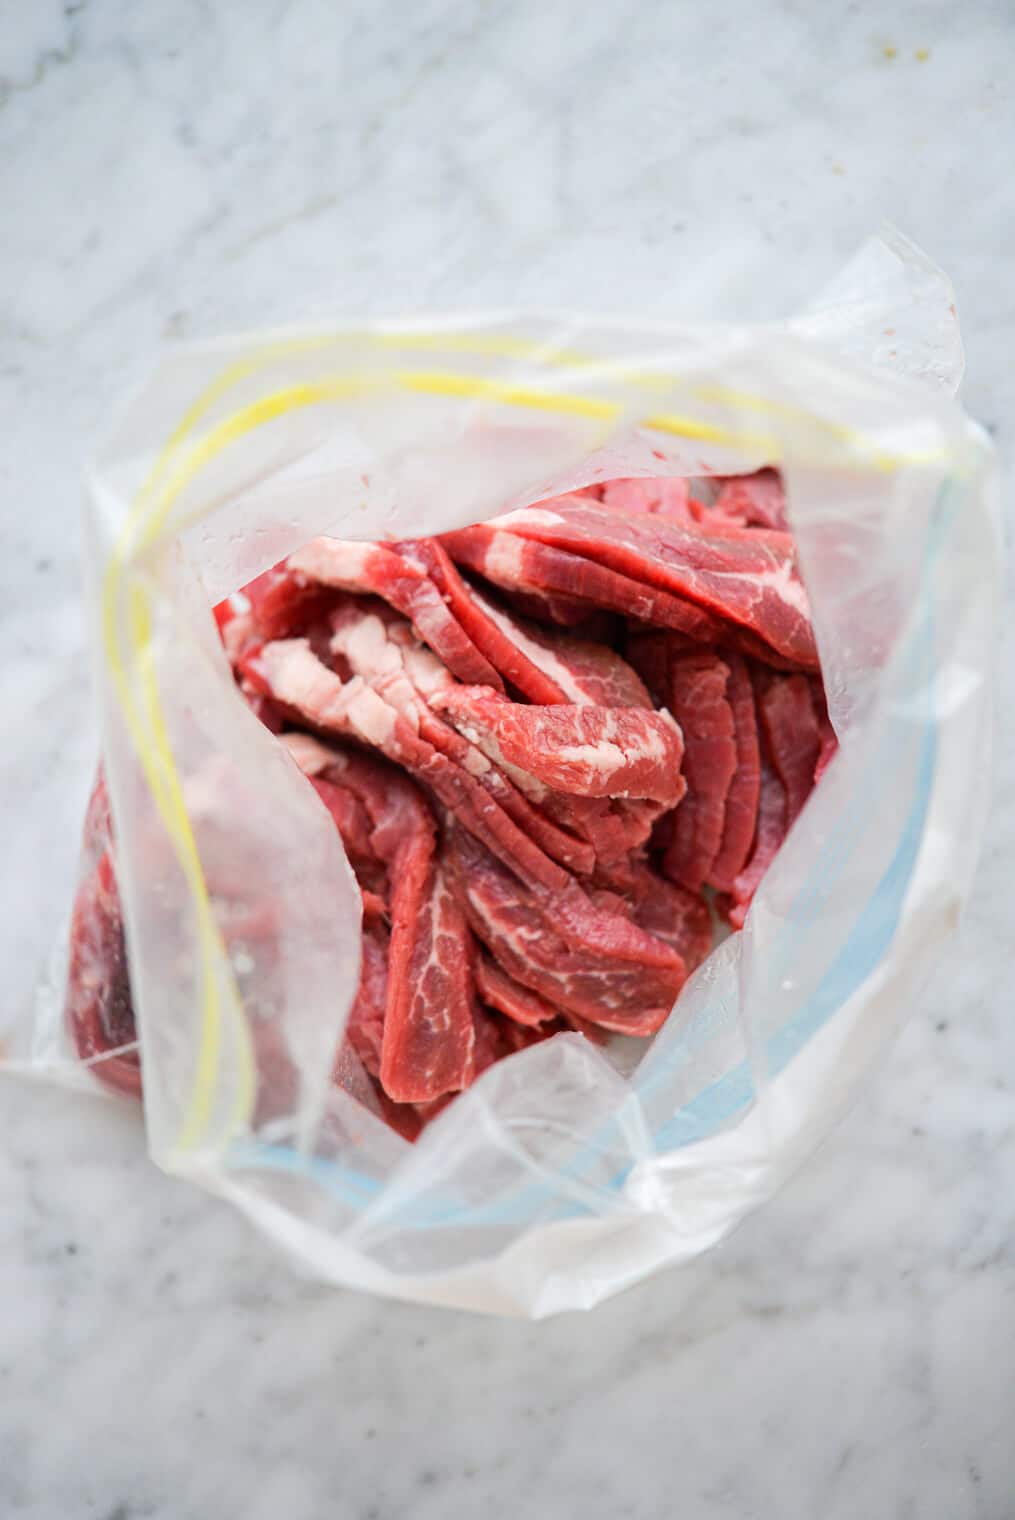 Top down view of plastic zipper bag containing raw, sliced beef